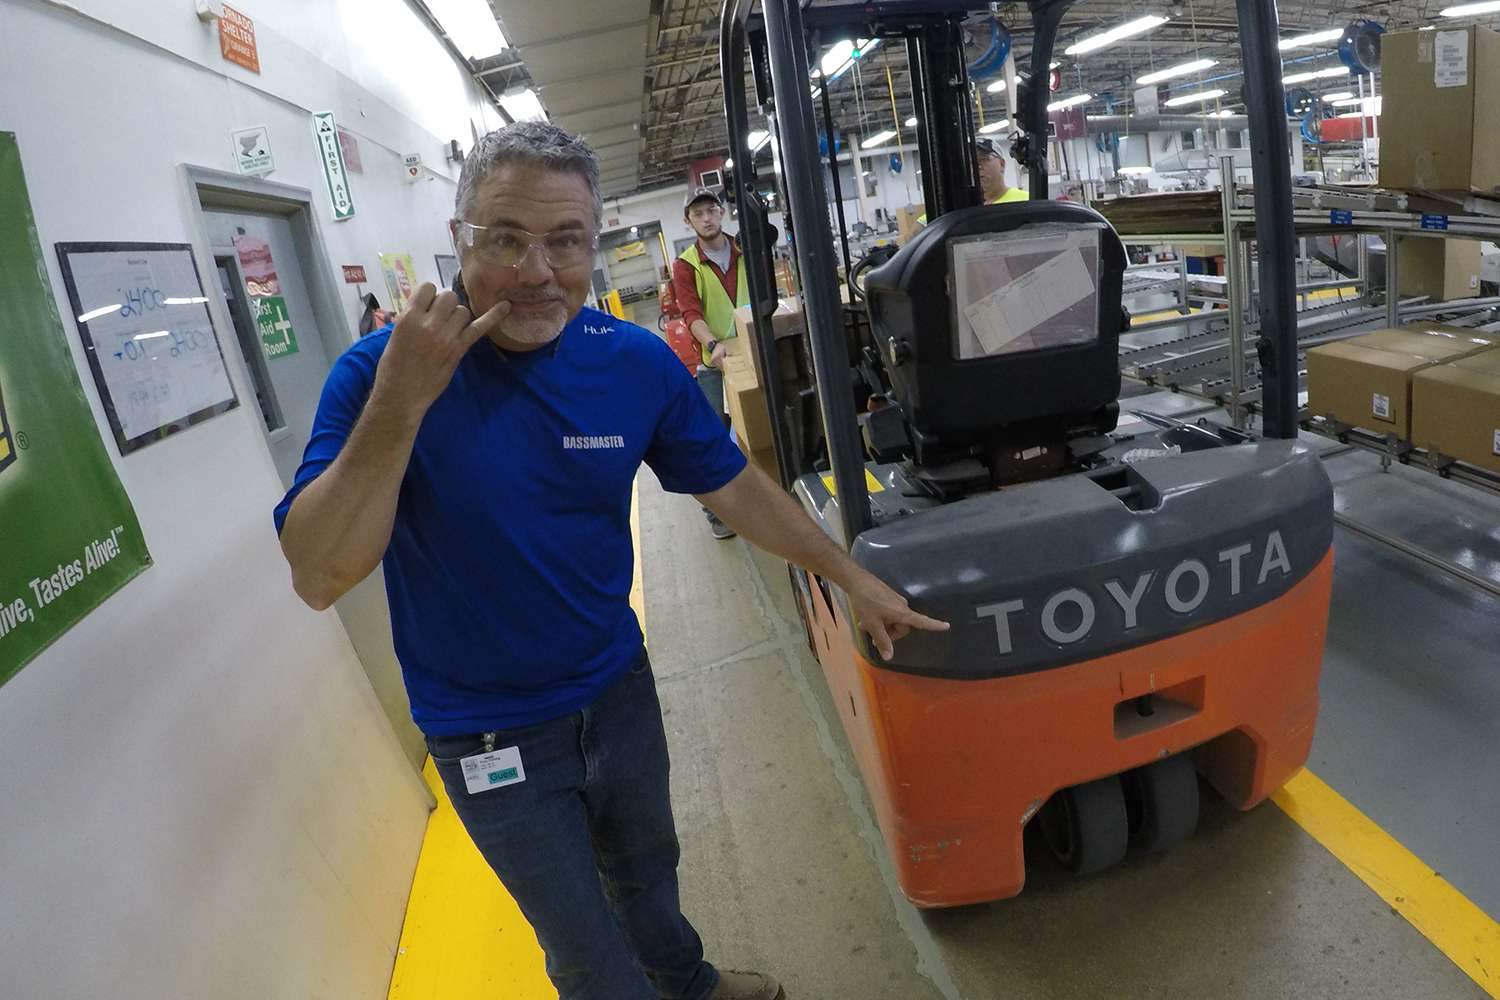 And, the folks at the Berkley plant use a Toyota forklift. How cool is that?